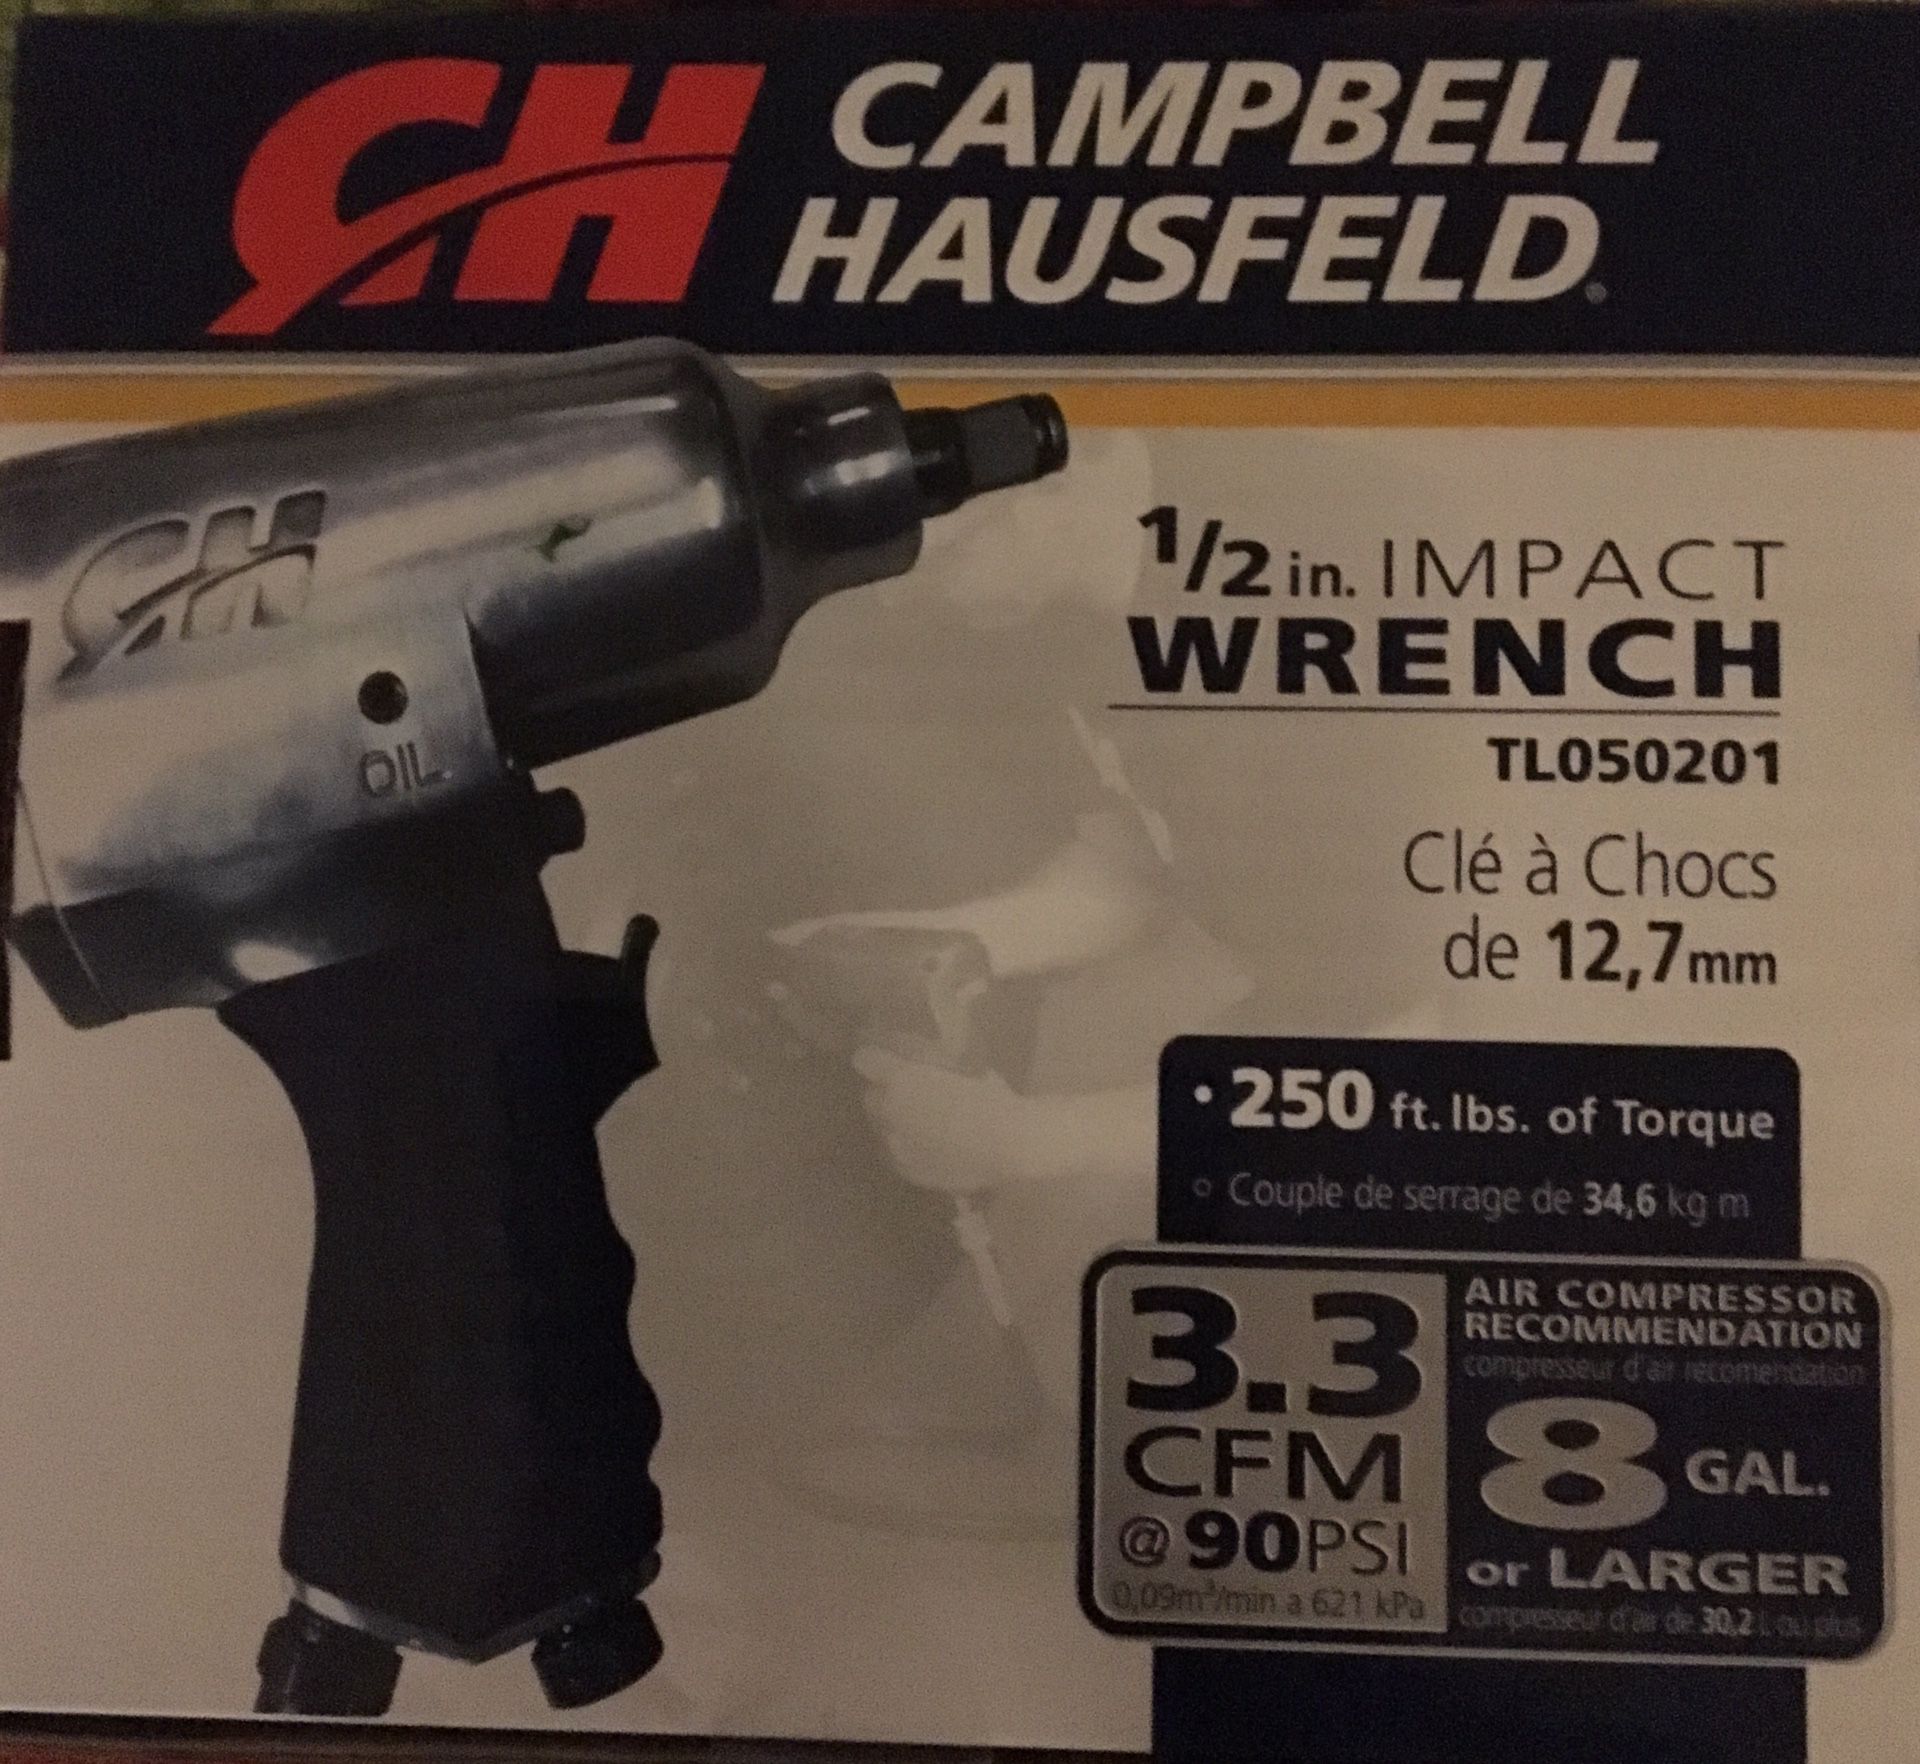 Campbell Hausfield 1/2 inch Impact Wrench TL050201